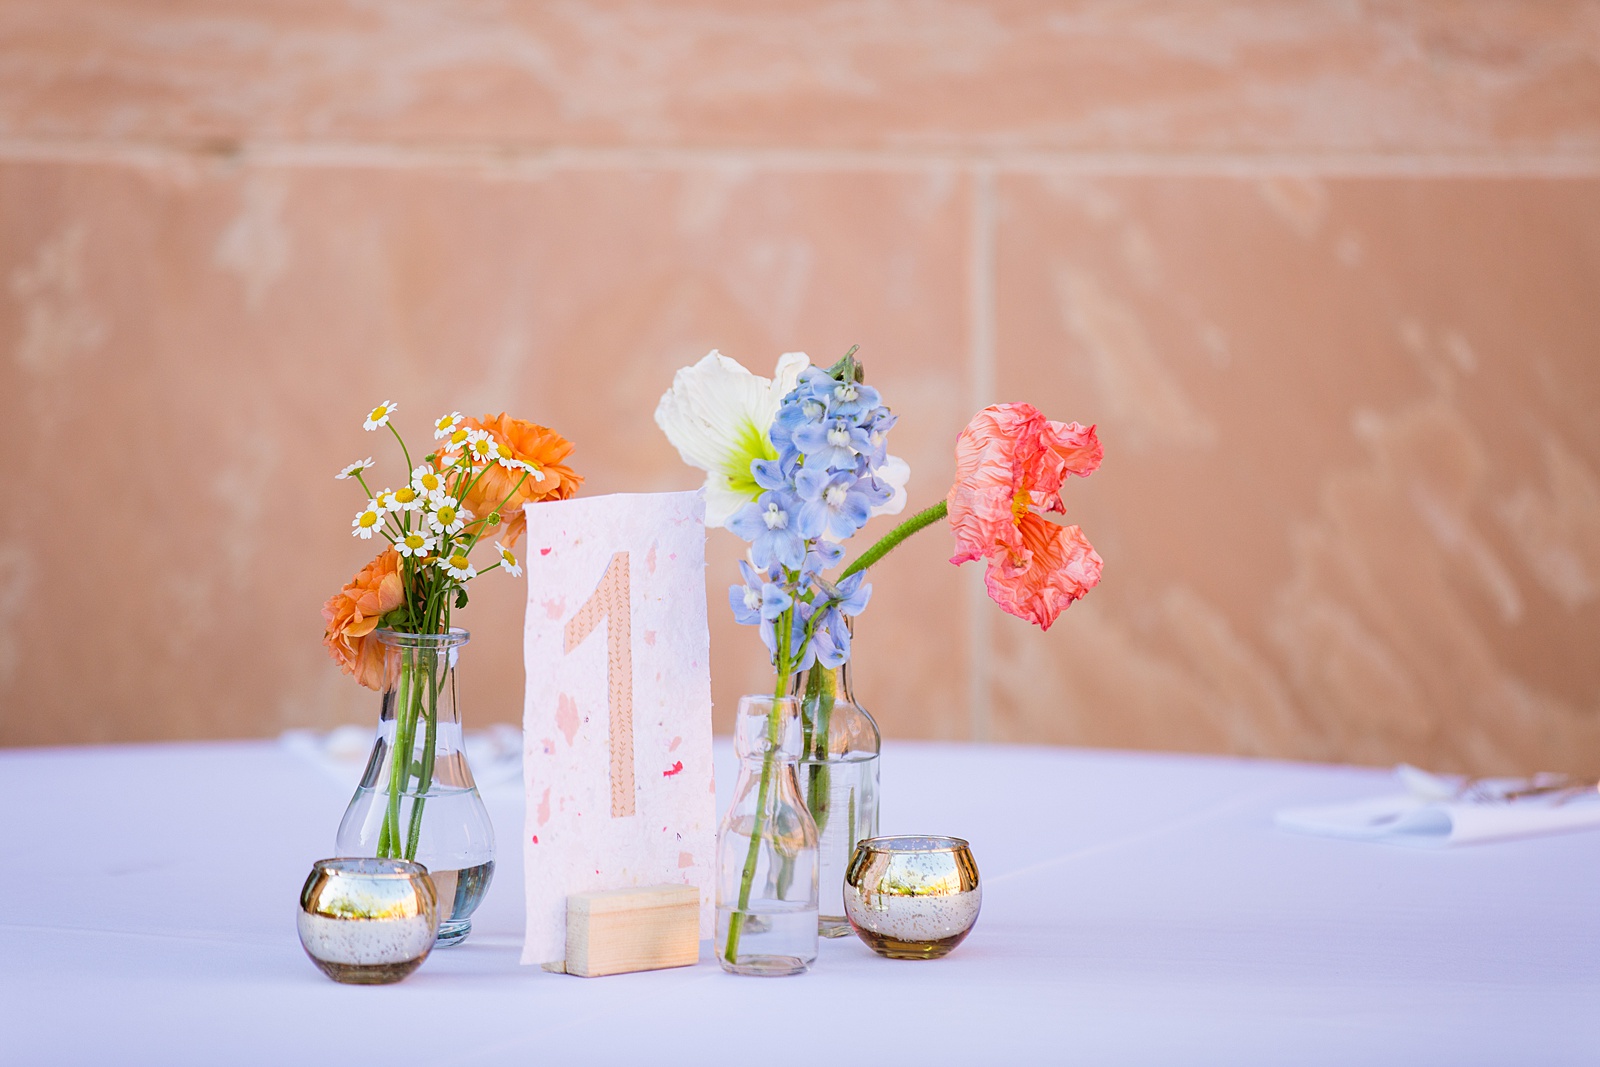 Eclectic and handmade reception decorations at Arizona Historical Society wedding reception by Tempe wedding photographer PMA Photography.